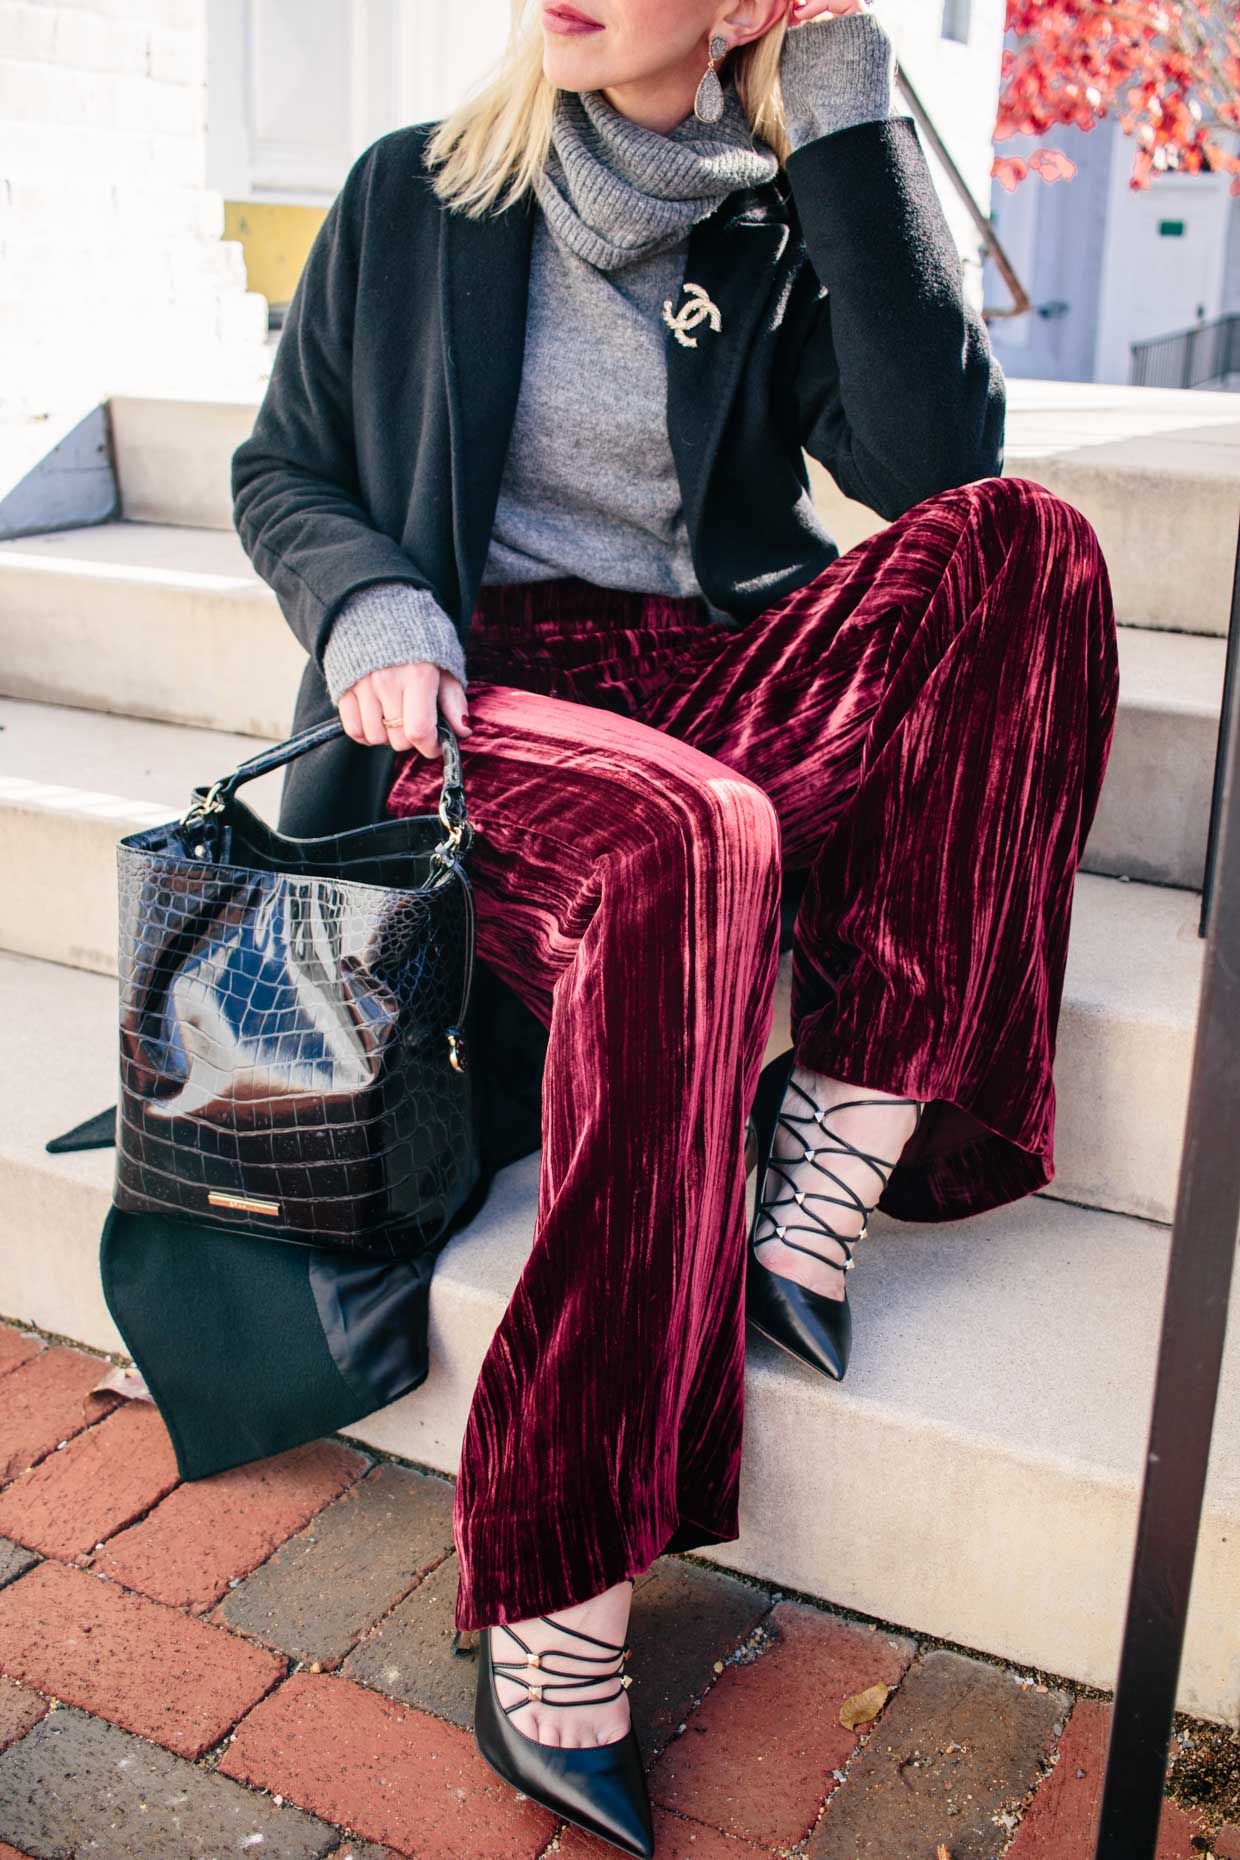 https://www.meagansmoda.com/wp-content/uploads/2019/12/Meagan-Brandon-fashion-blogger-of-Meagans-Moda-wears-red-velvet-pants-for-holiday-with-gray-sweater-and-Valentino-rockstud-pumps-how-to-wear-velvet-pants.jpg